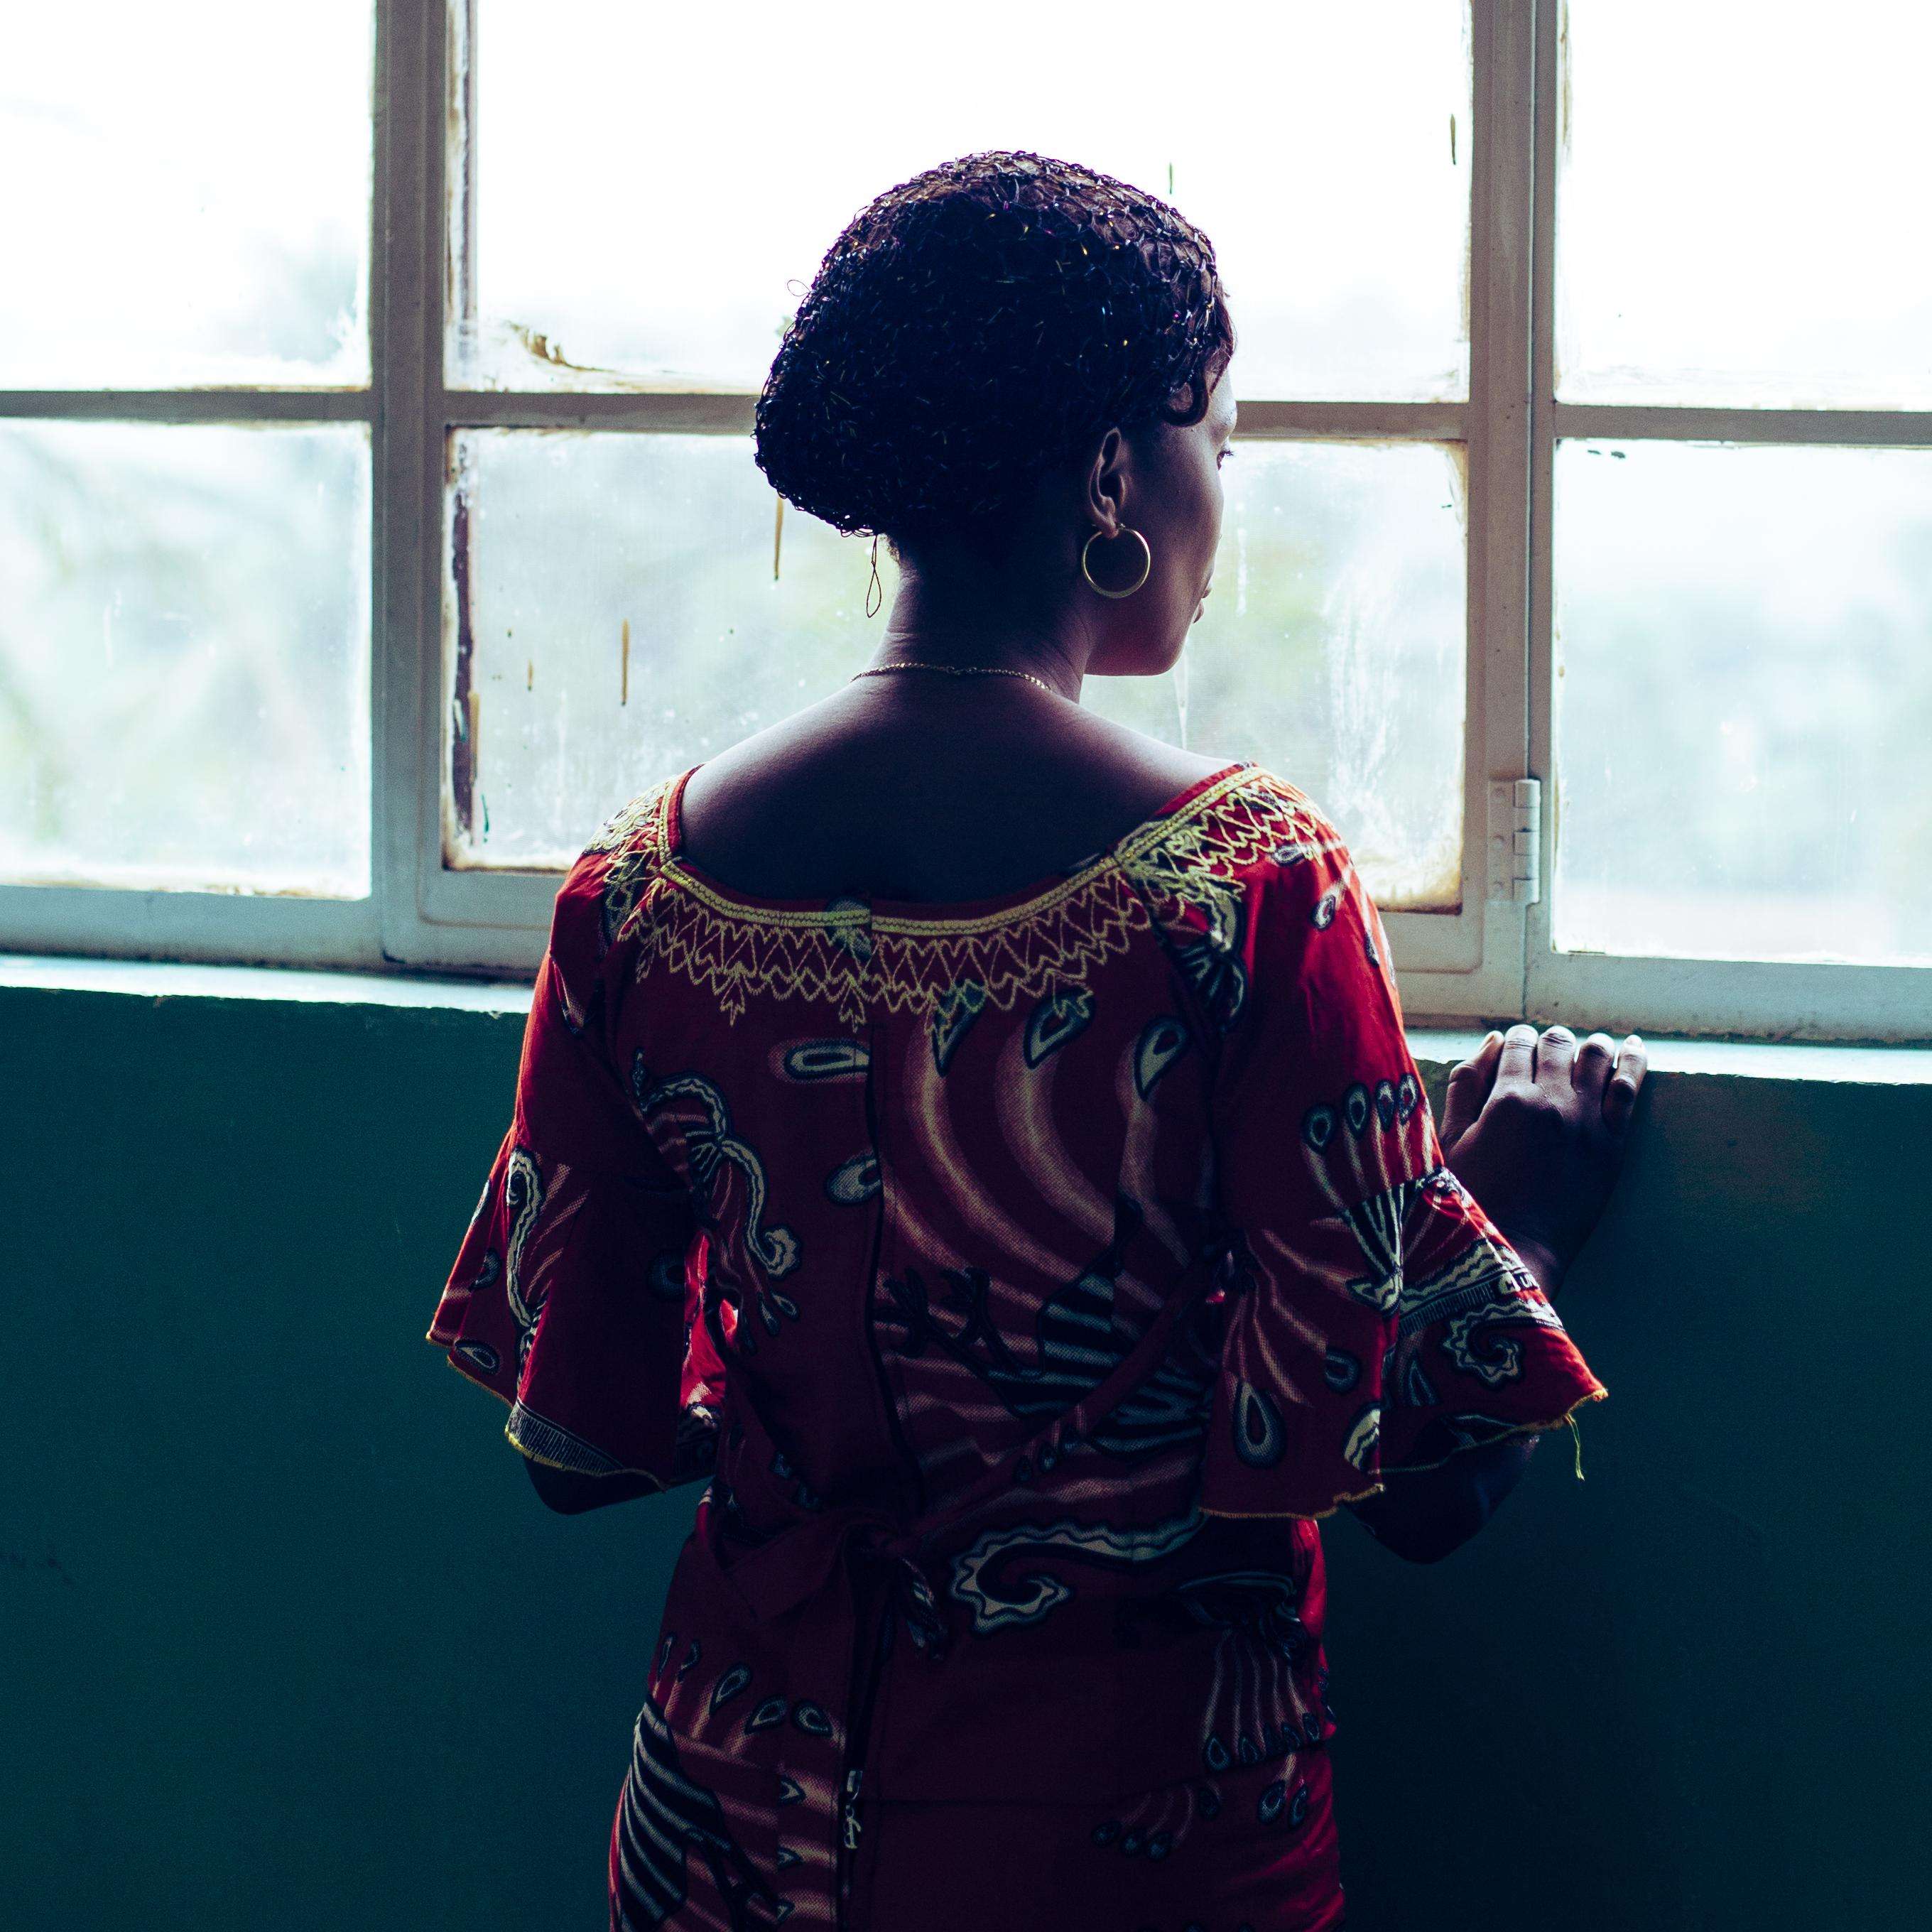 mental health care for survivors of sexual violence in DRC